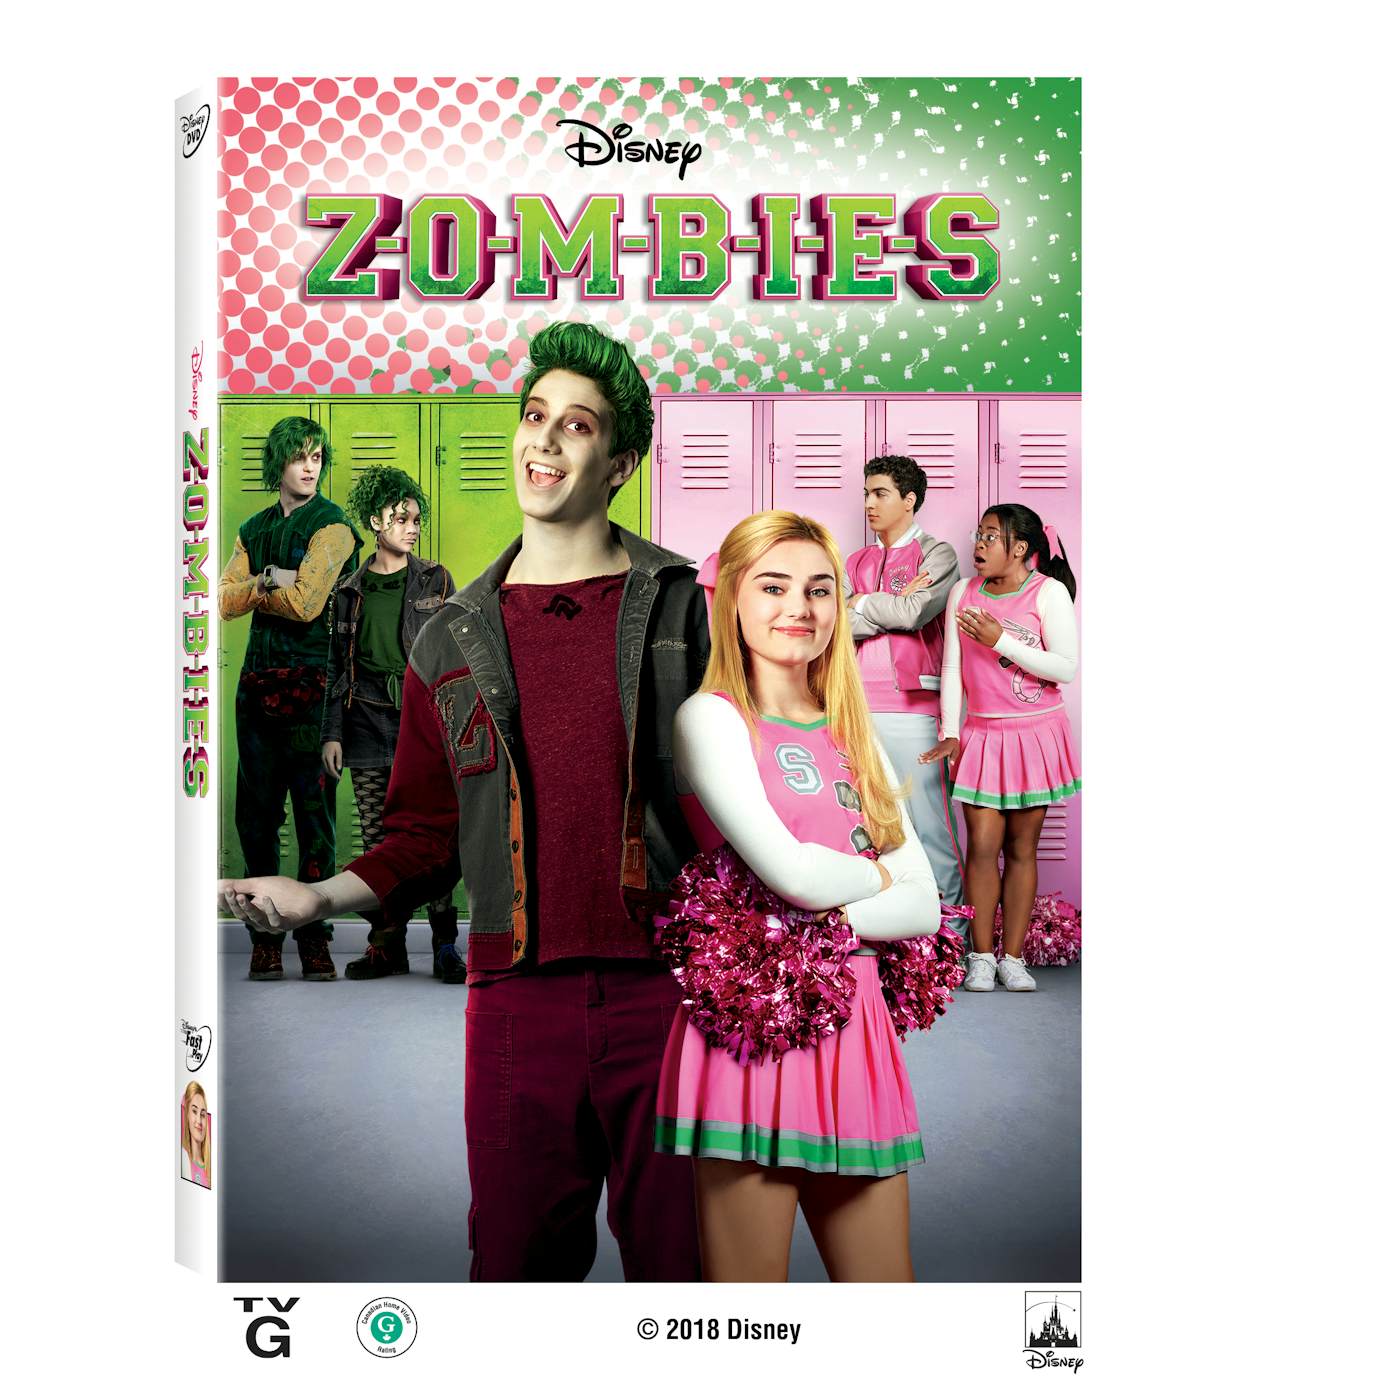 The Zombies DVD